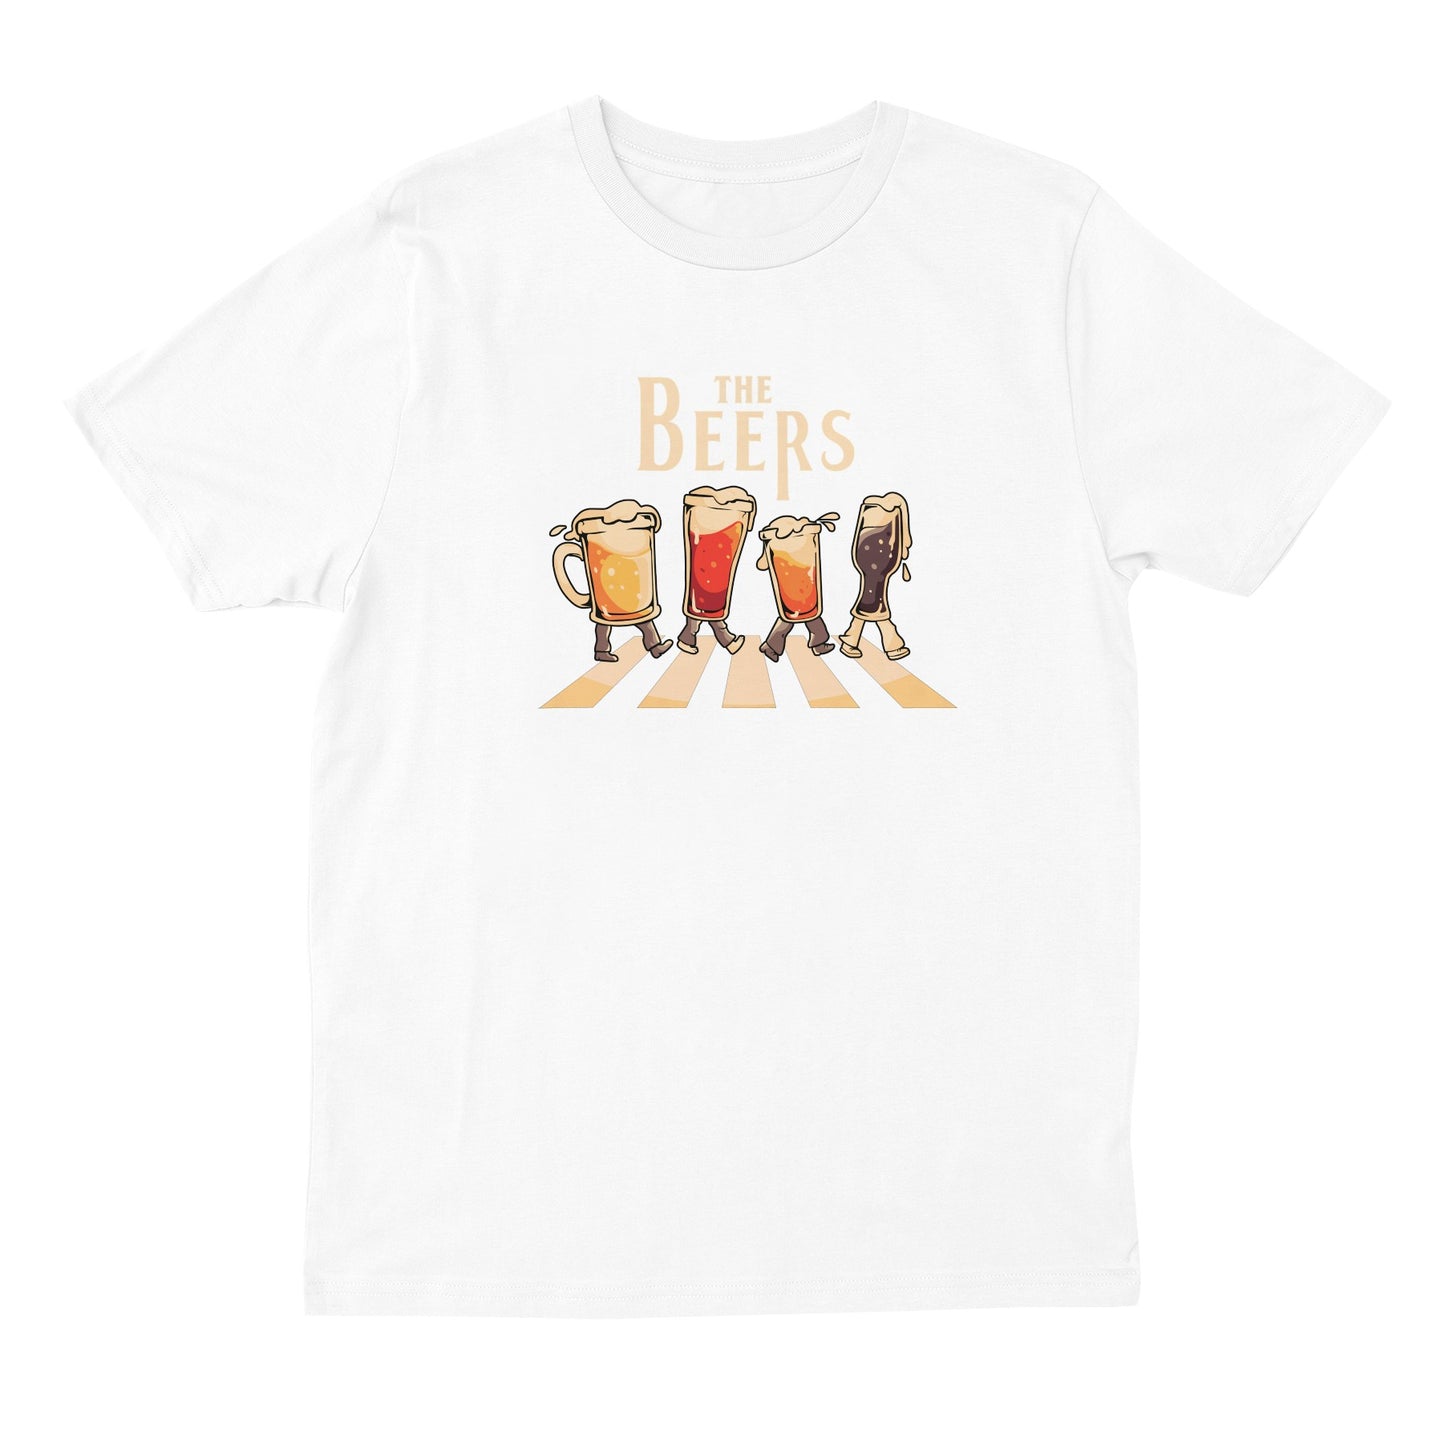 the beers t shirt - white